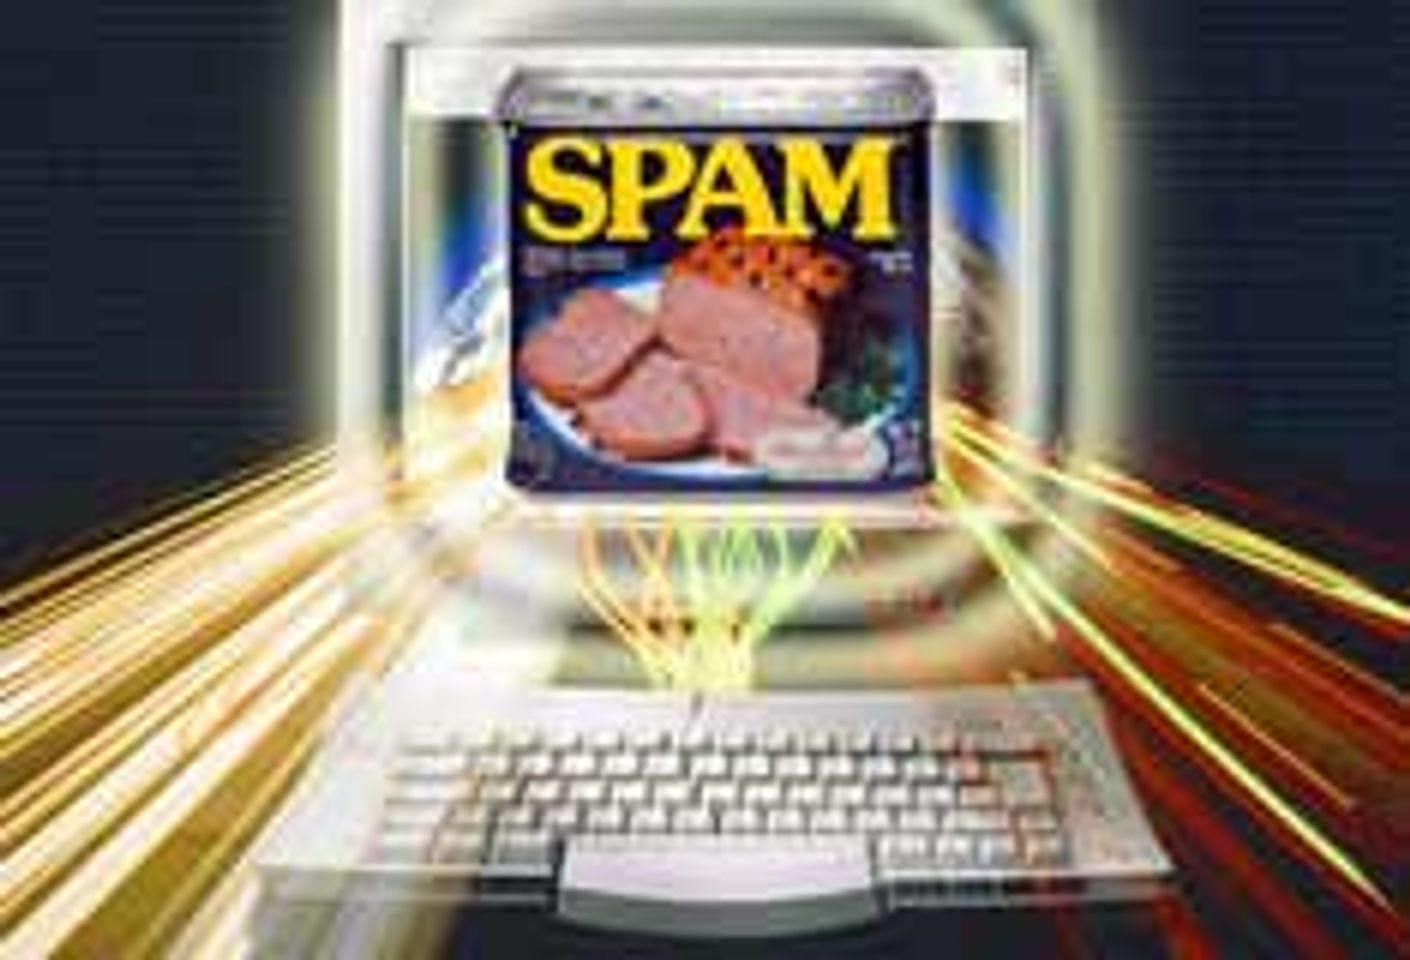 FTC Says Spam With Porn Requires Warning Label